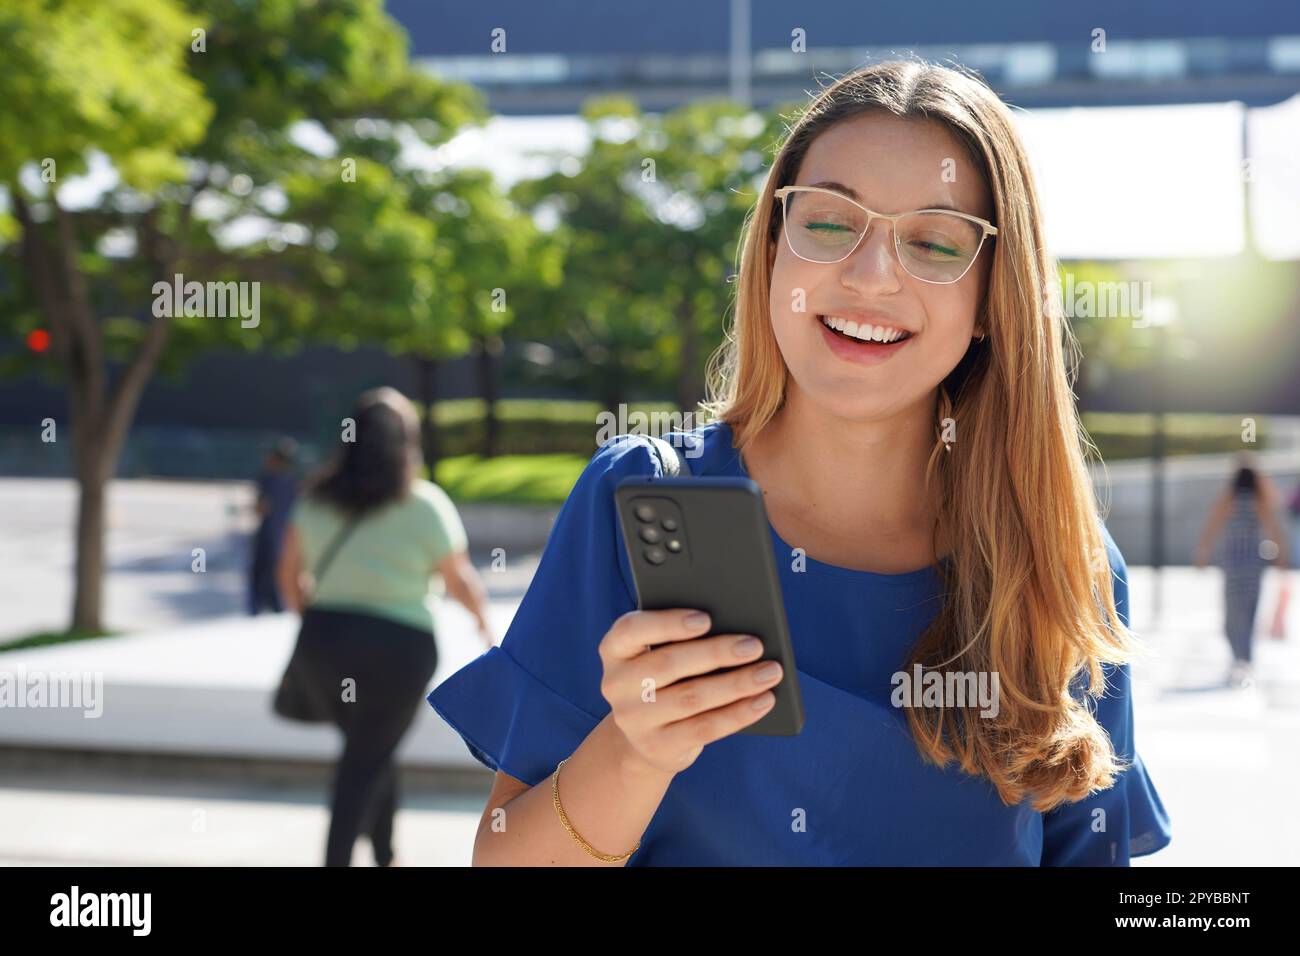 Young lady with glasses checking her mobile phone outdoors Stock Photo